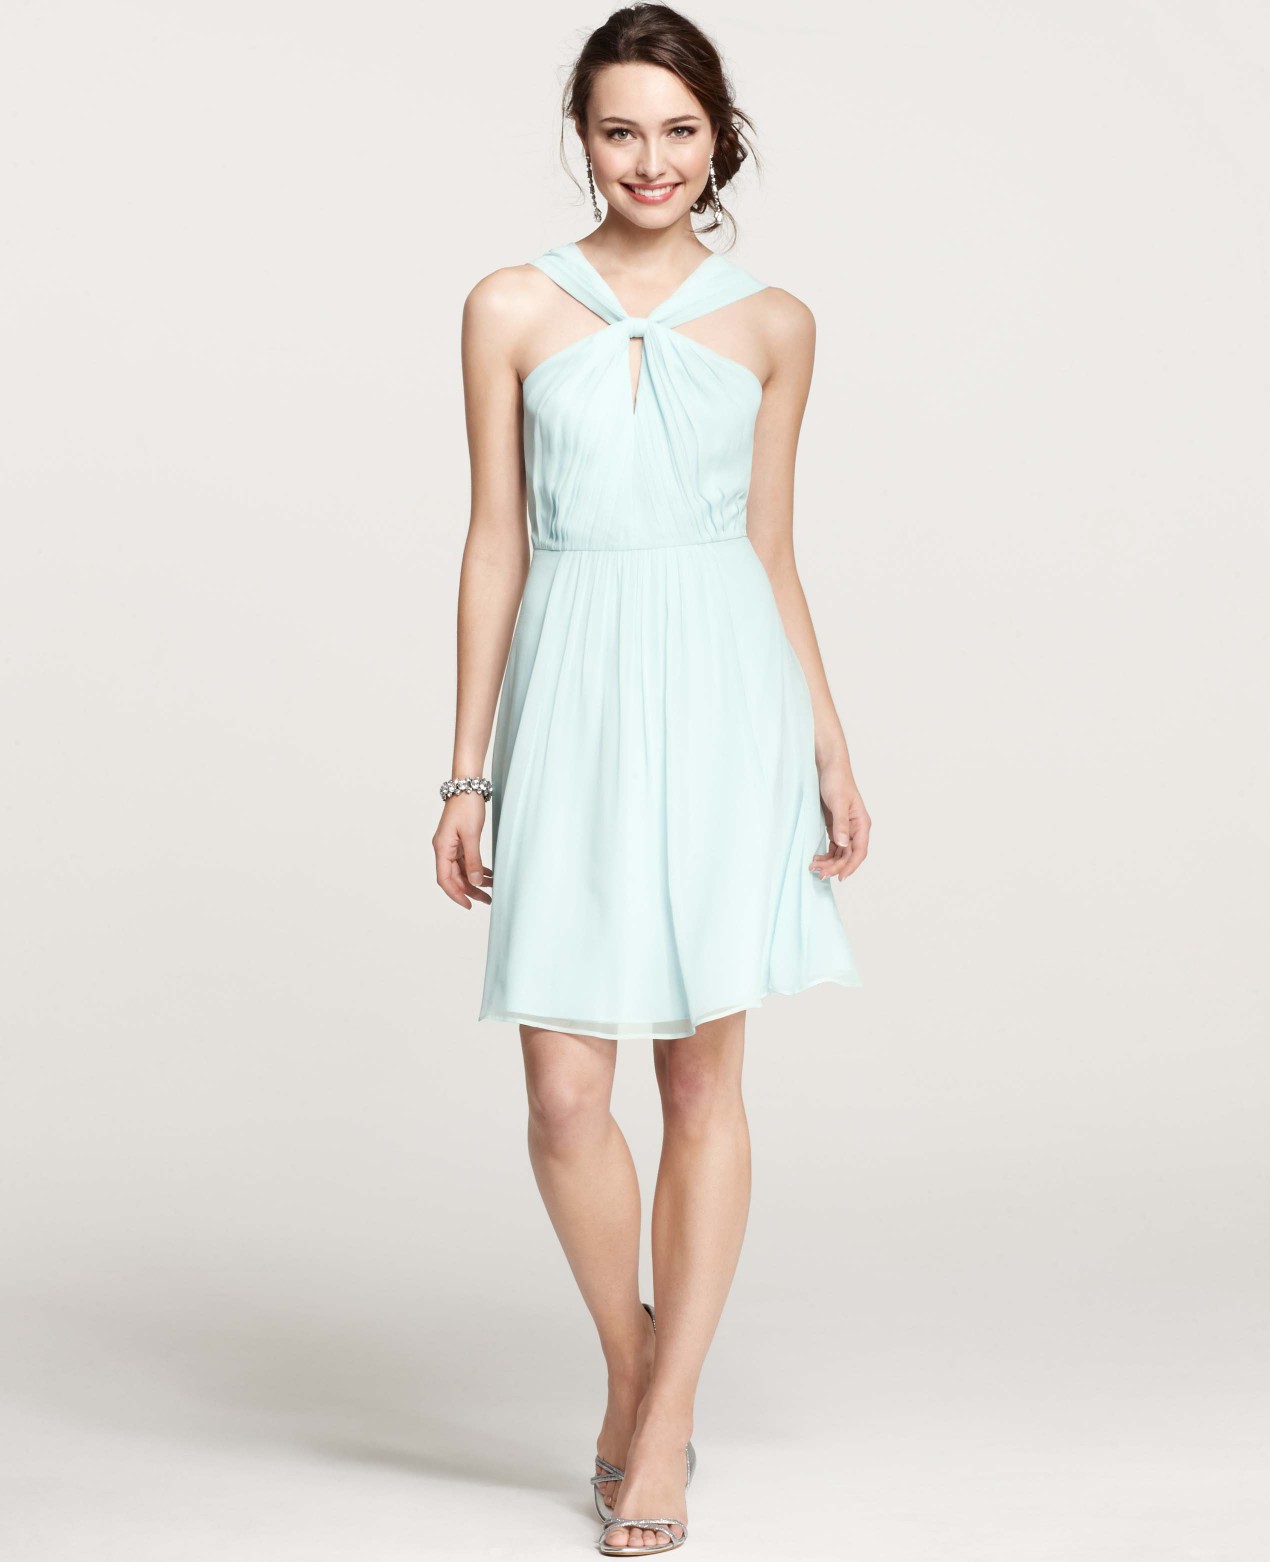 Top Ann Taylor Wedding Bridesmaid Dresses  Learn more here 